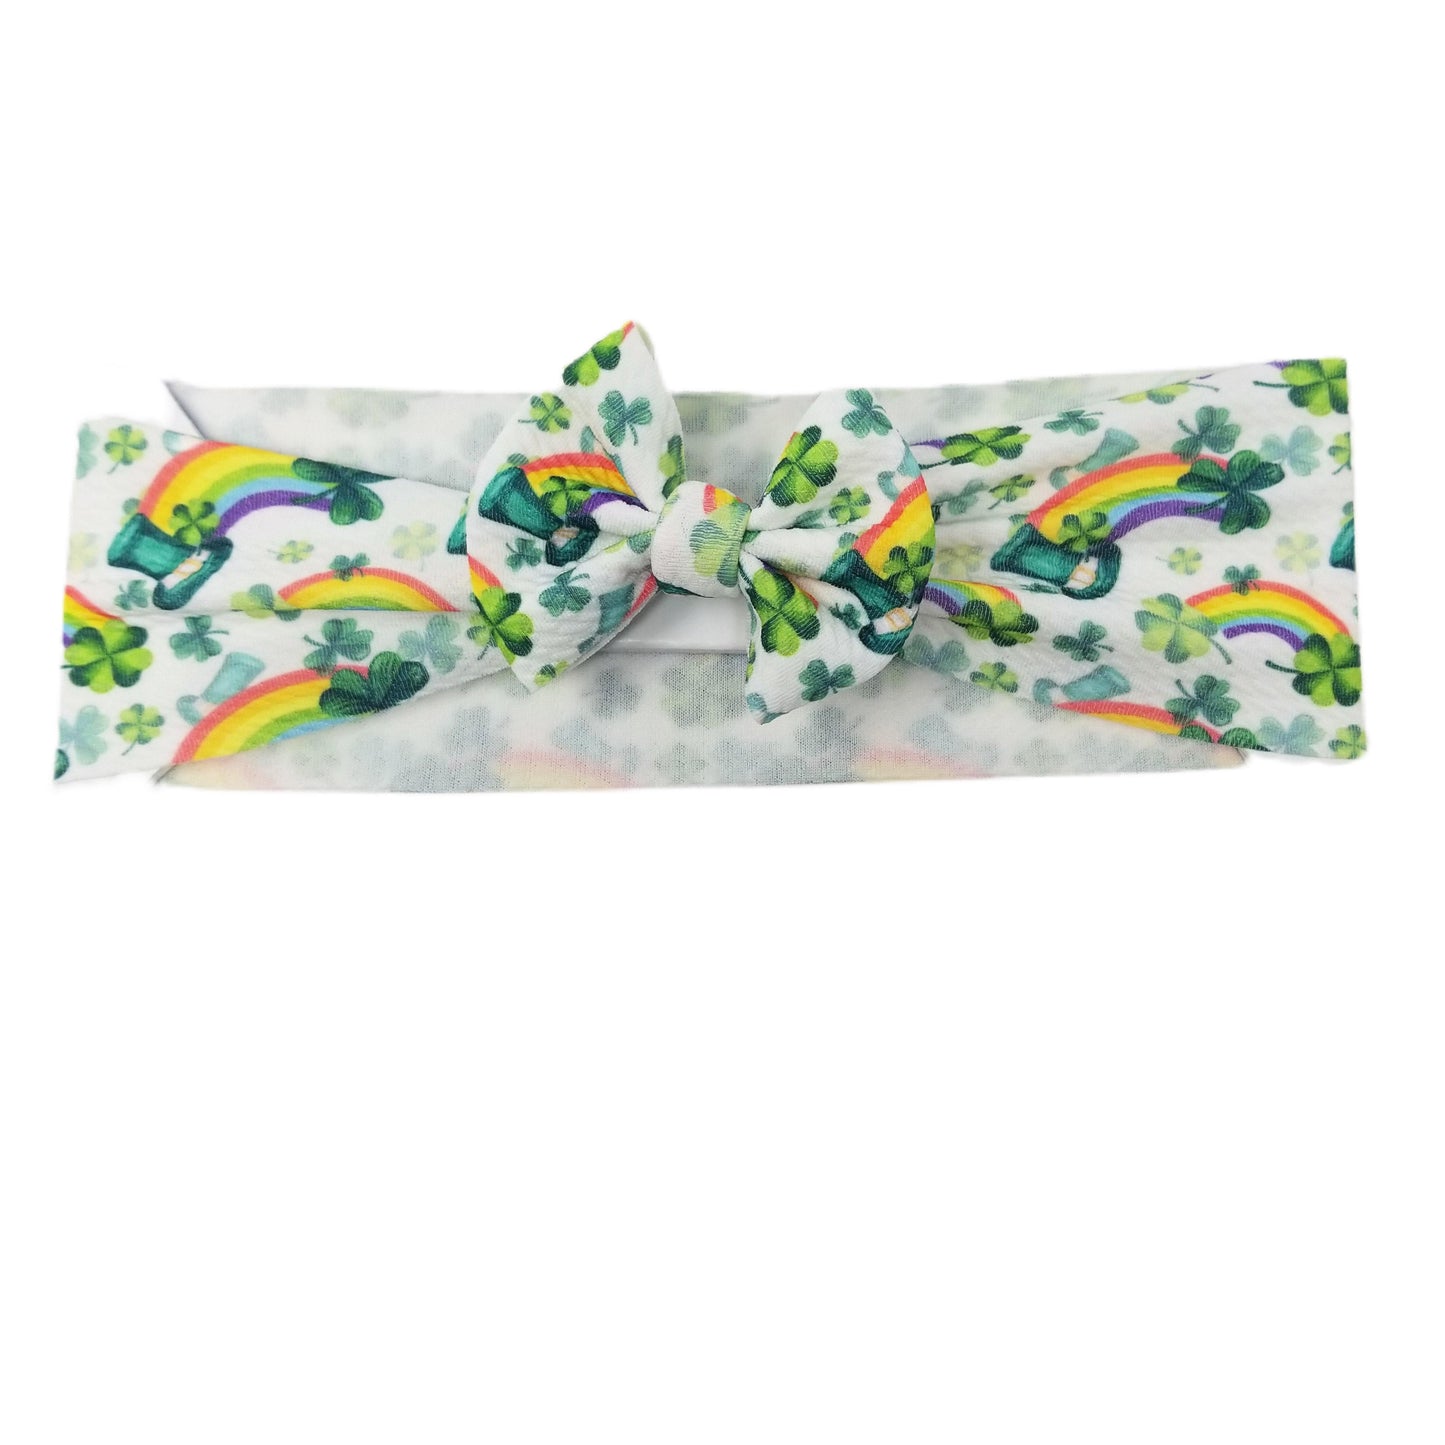 Luck of the Irish Fabric Bow Headwrap - Waterfall Wishes